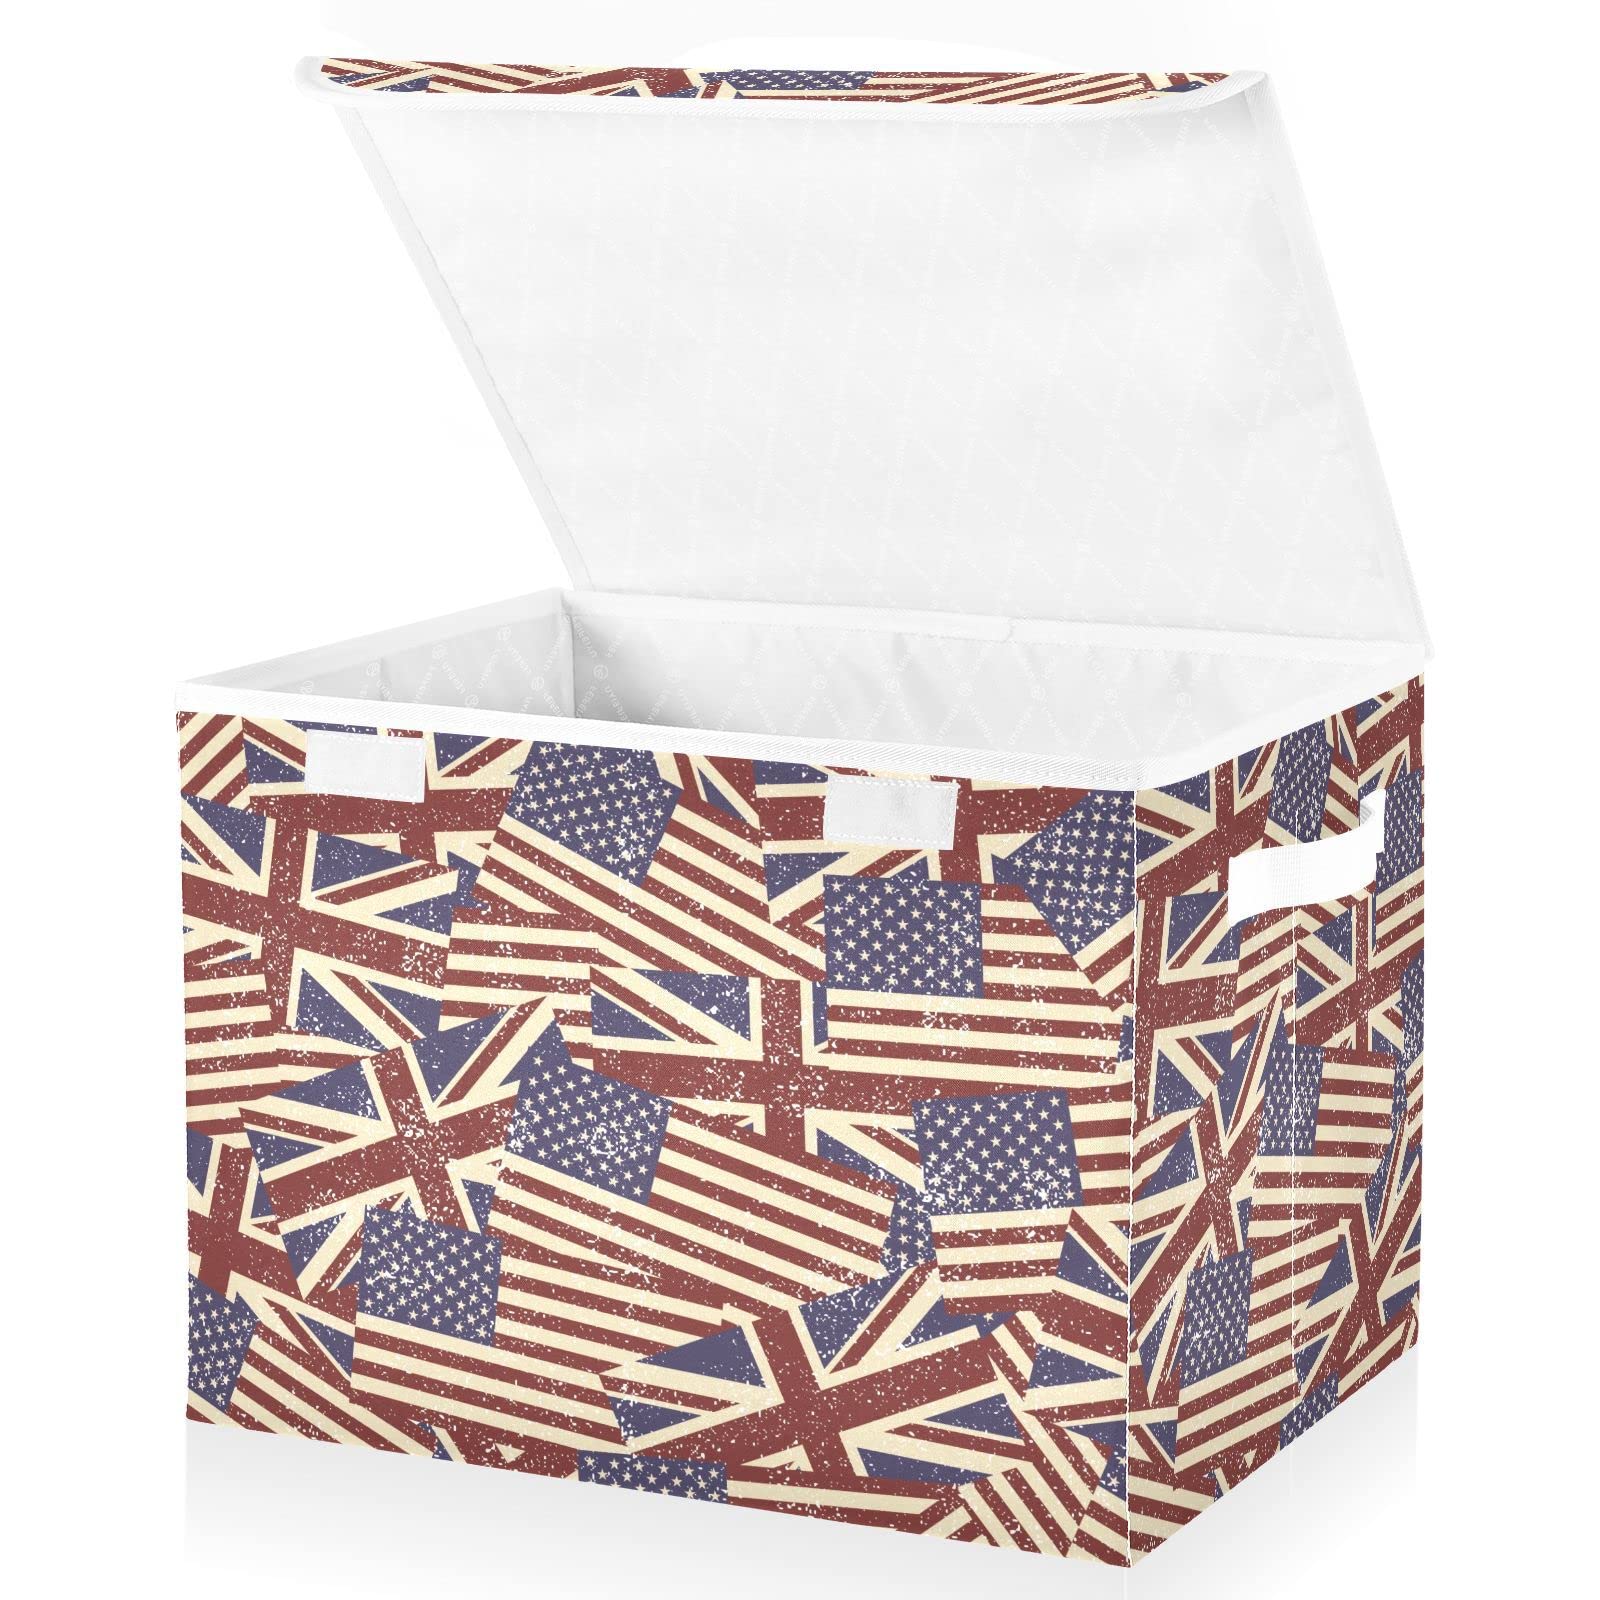 Vnurnrn Collapsible Storage Bin with Lid (British Usa Flag), Foldable Storage Basket Cube for Clothes Toys 16.5×12.6×11.8 Inches